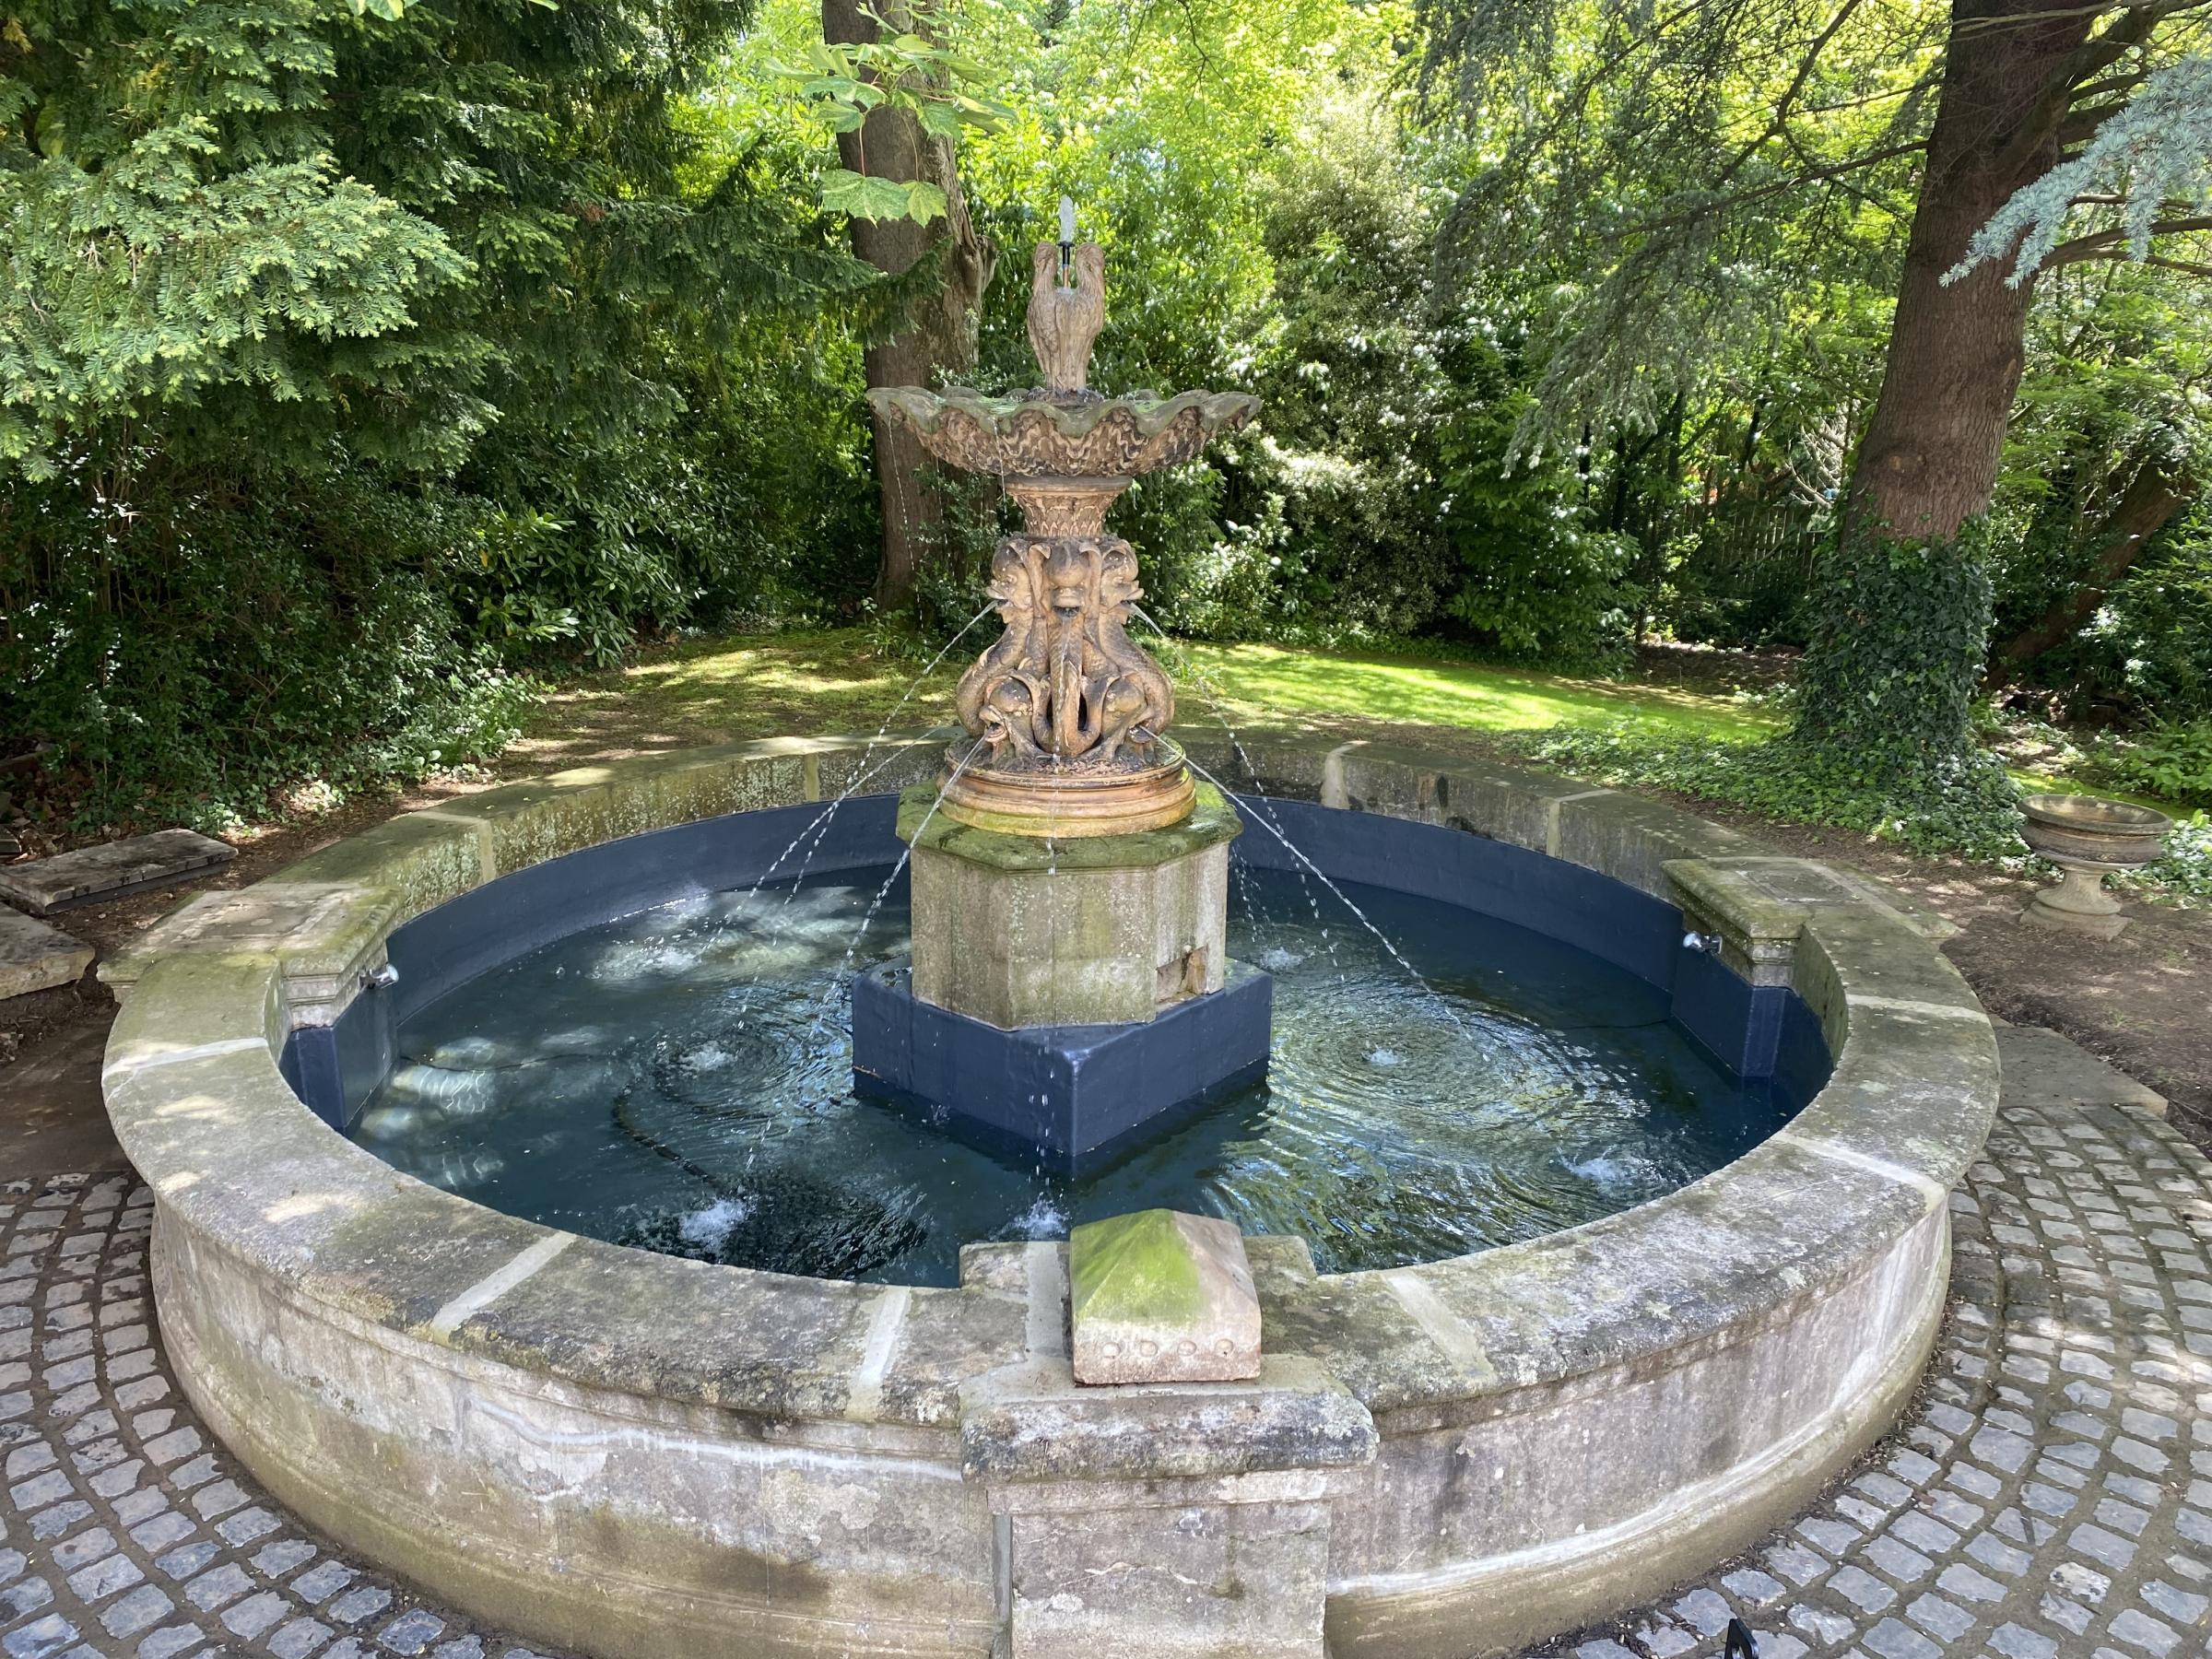 Sir Samuels newly restored fountain in the grounds of Southlands